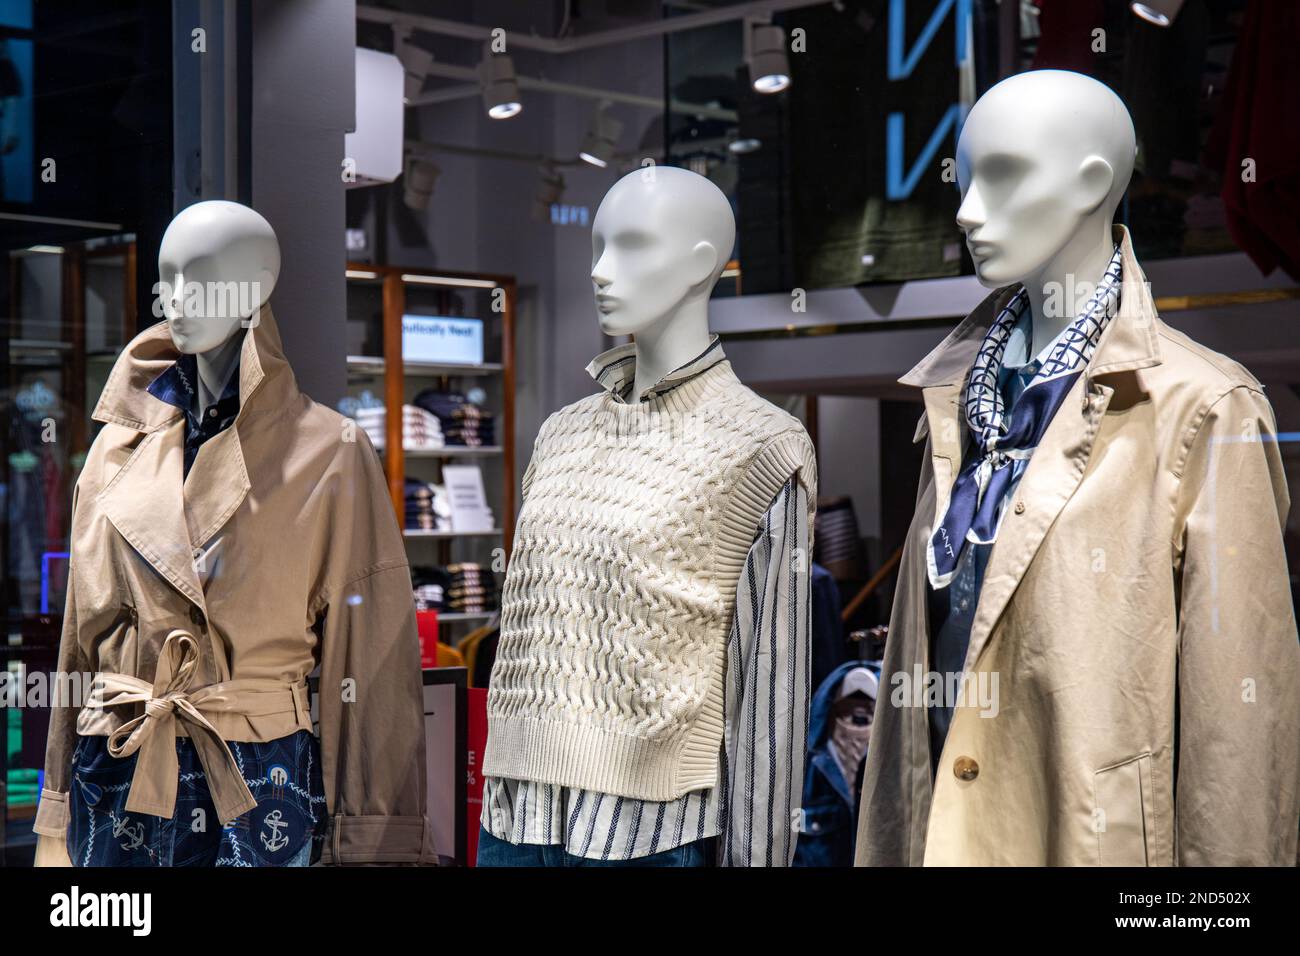 Mannequins in clothing store display window Stock Photo